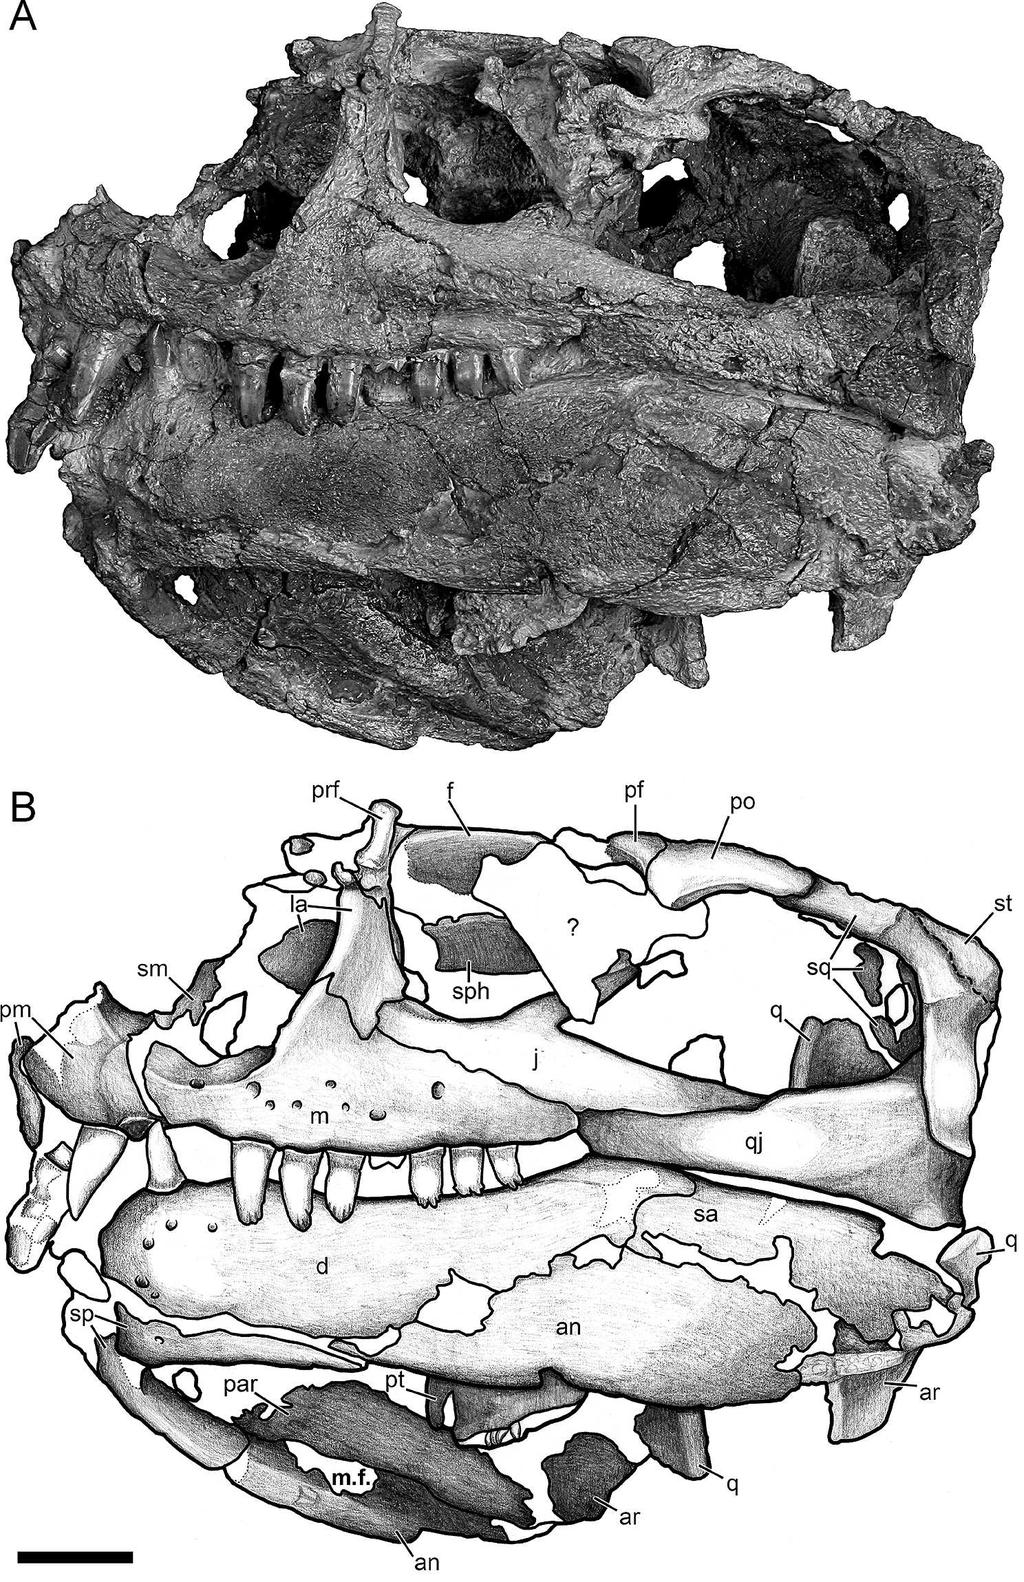 MADDIN ET AL. CRANIAL ANATOMY OF ENNATOSAURUS 163 FIGURE 2. 2 cm. Ennatosaurus tecton (PIN 4543/1) in lateral view. A, photograph; B, line drawing. Abbreviations given in Figure 1.